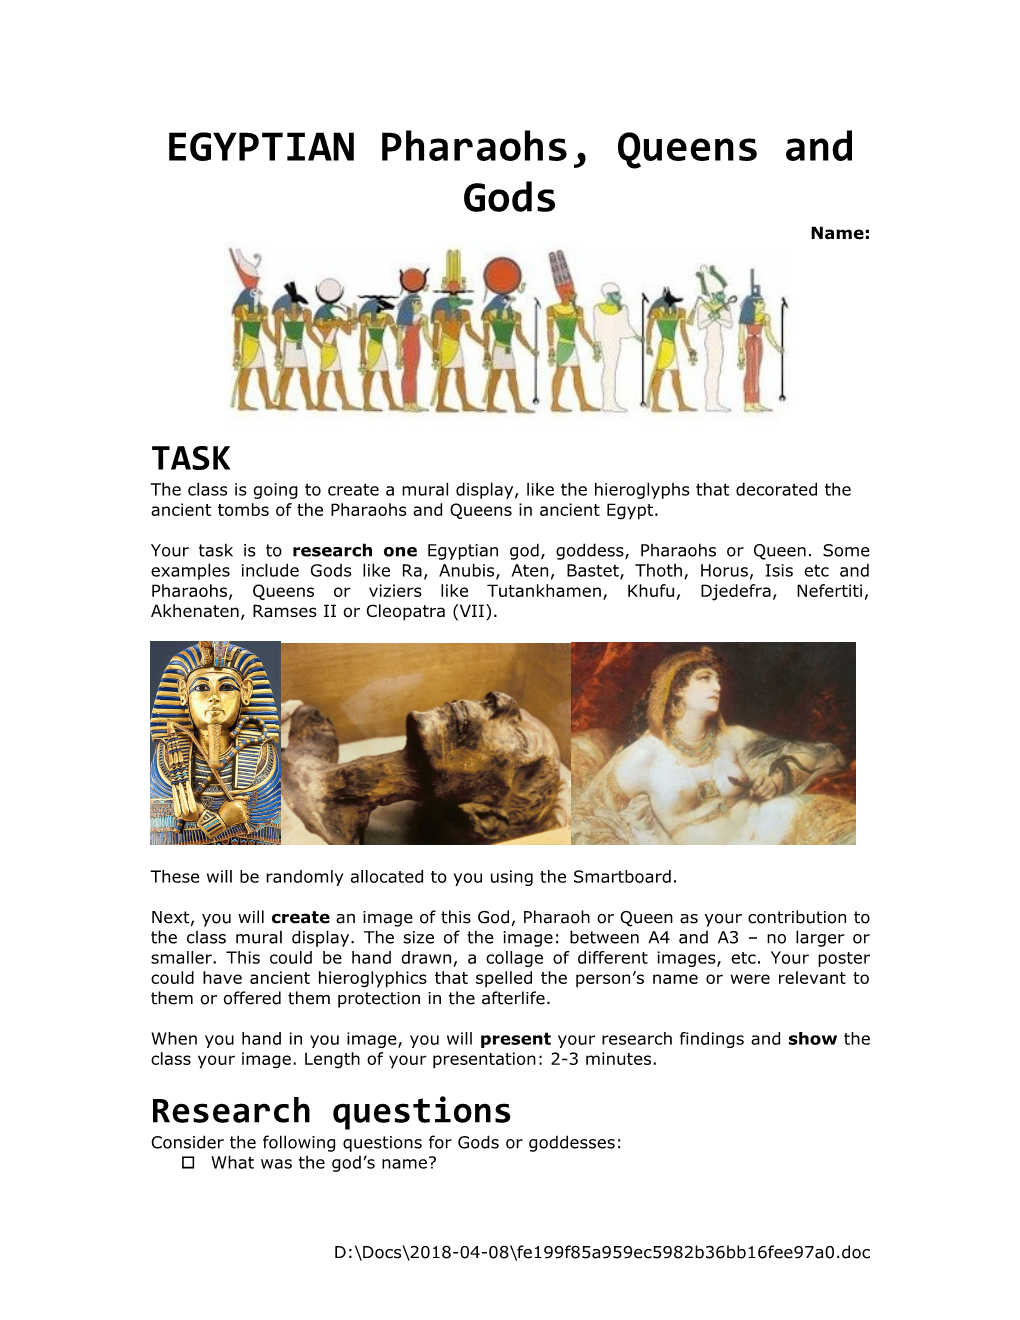 EGYPTIAN Pharaohs, Queens and Gods